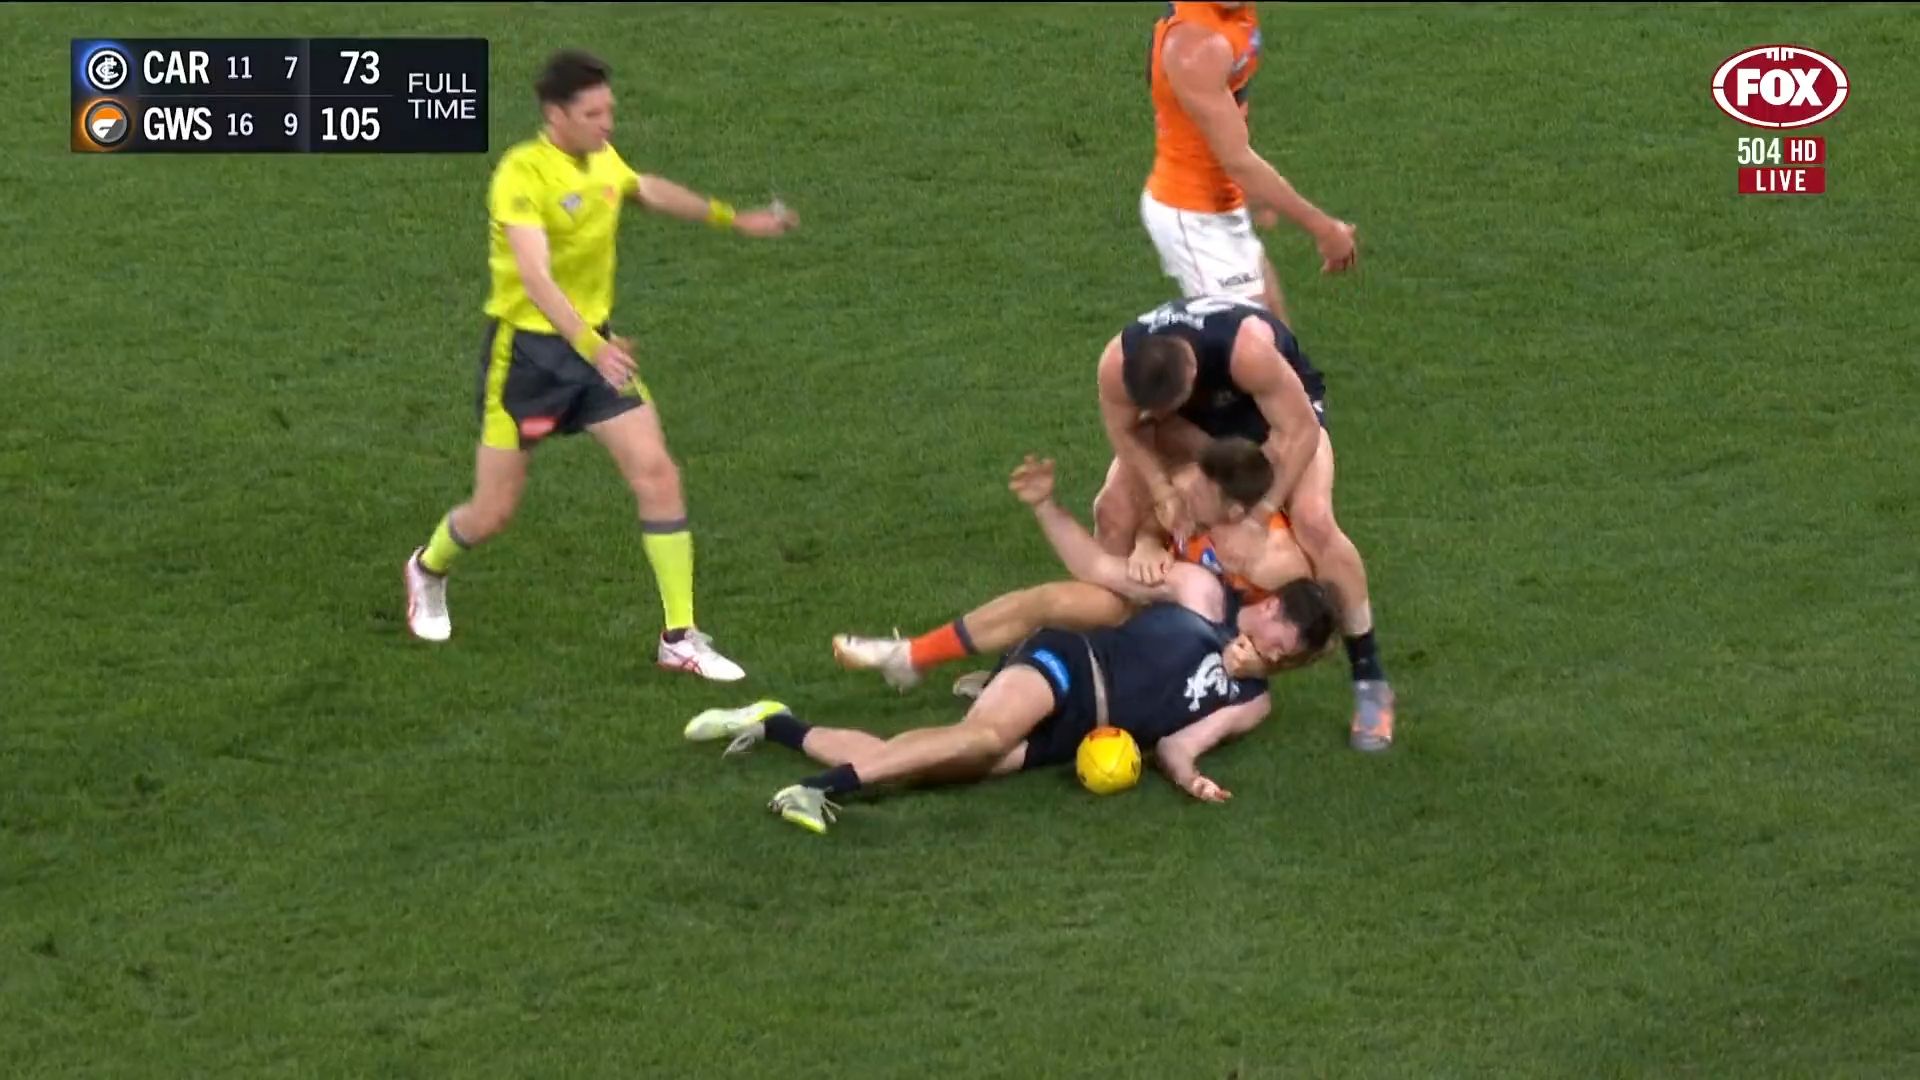 'Be nervous': Kane Cornes' warning to Carlton's Jacob Weitering after Toby Greene incident